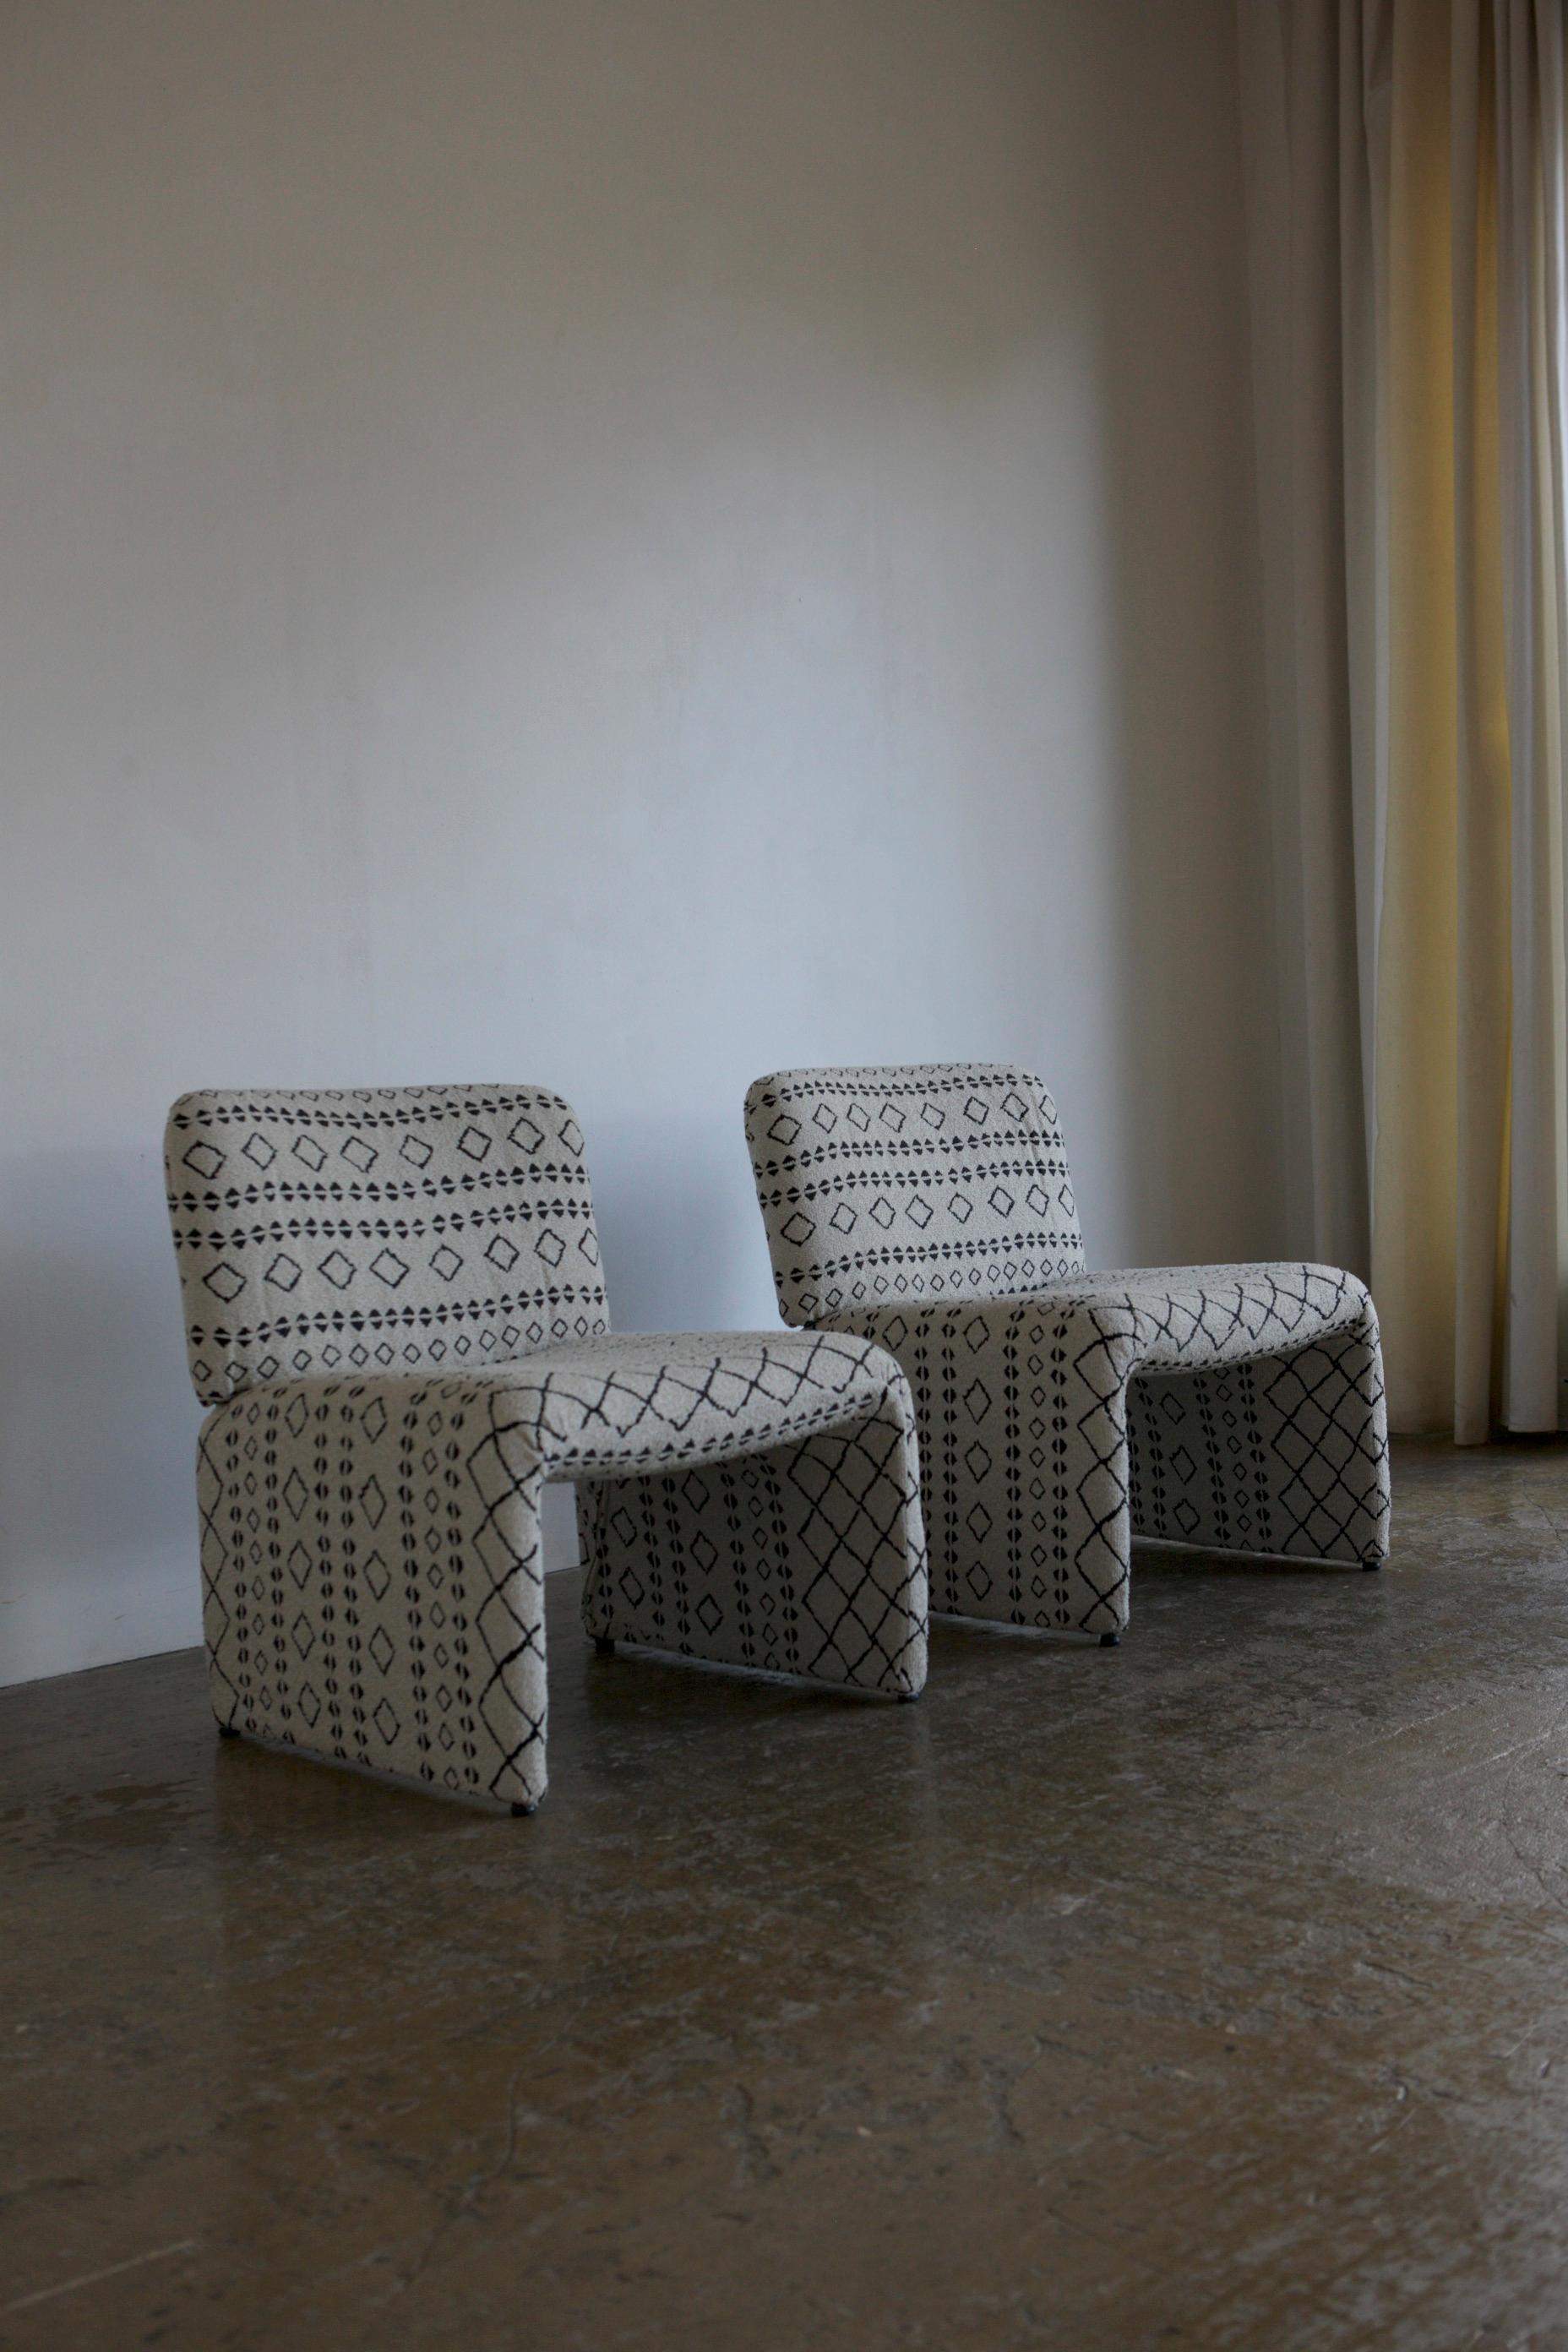 These chairs retain their original 1960's upholstery; a white boucle with a black print woven into it. They are constructed of moulded fibreglass with a foam seat and back rest. Price is for the pair.